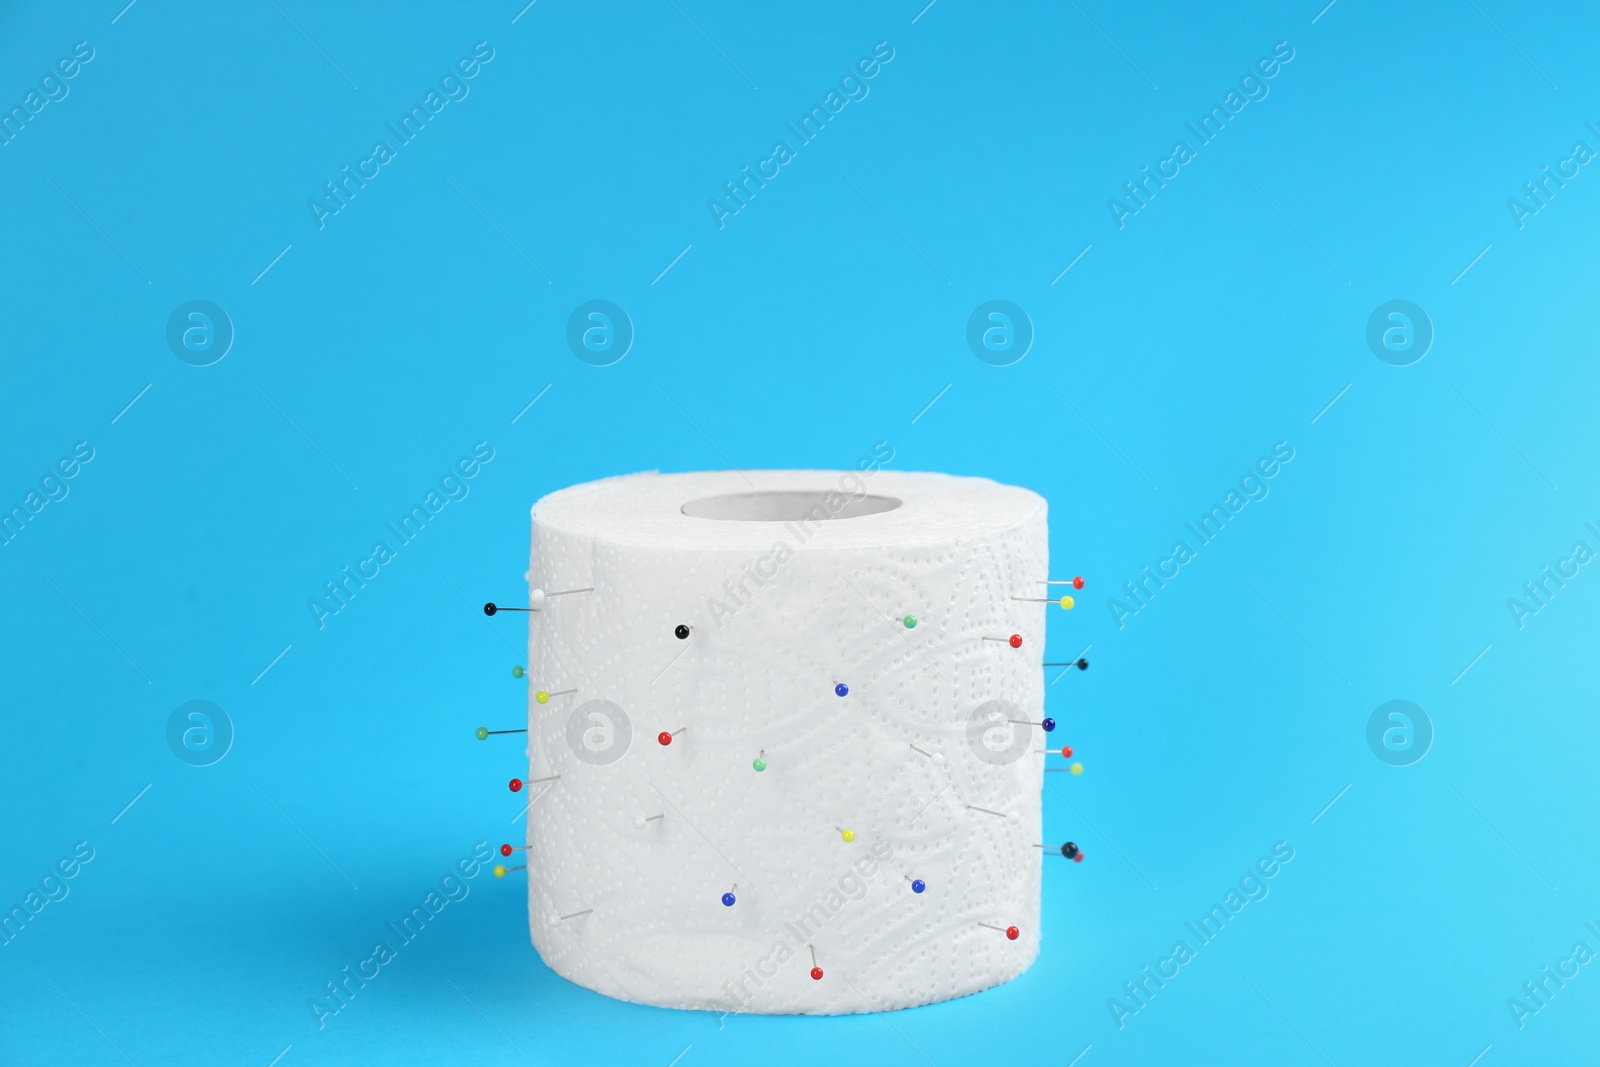 Photo of Roll of toilet paper with straight pins on light blue background. Hemorrhoid problems